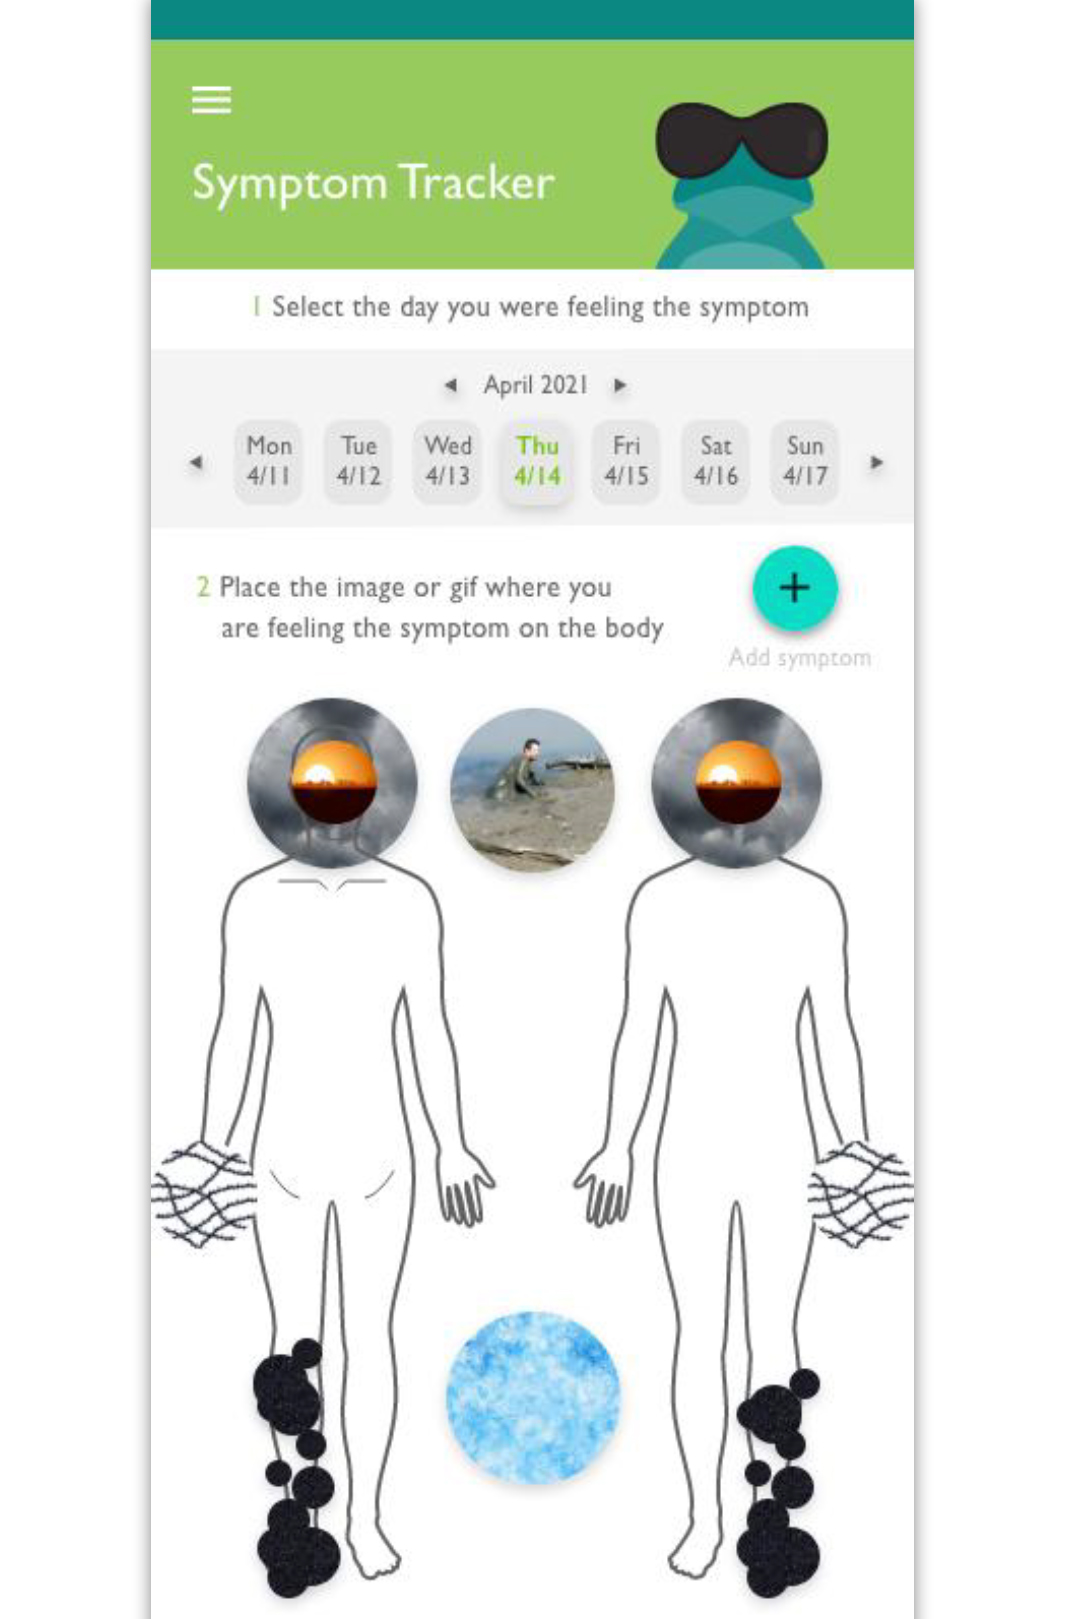 A screenshot of the Frankly app Symptom Tracker. User can select day they were feeling a symptom and place a photo representing the symptom where it occurred on the body.